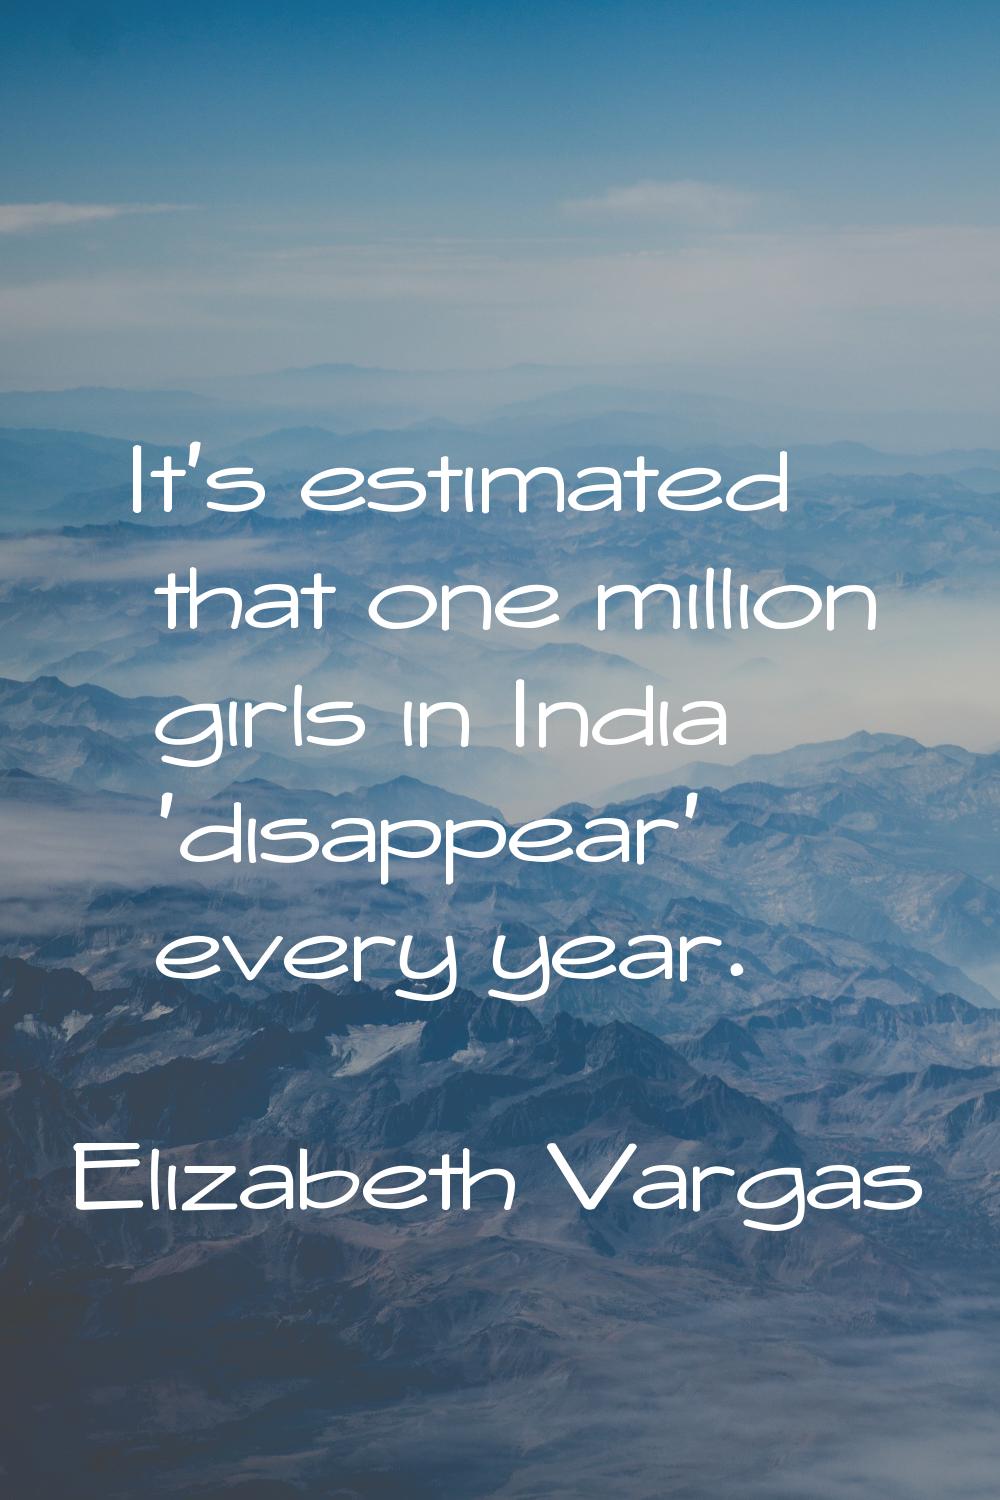 It's estimated that one million girls in India 'disappear' every year.